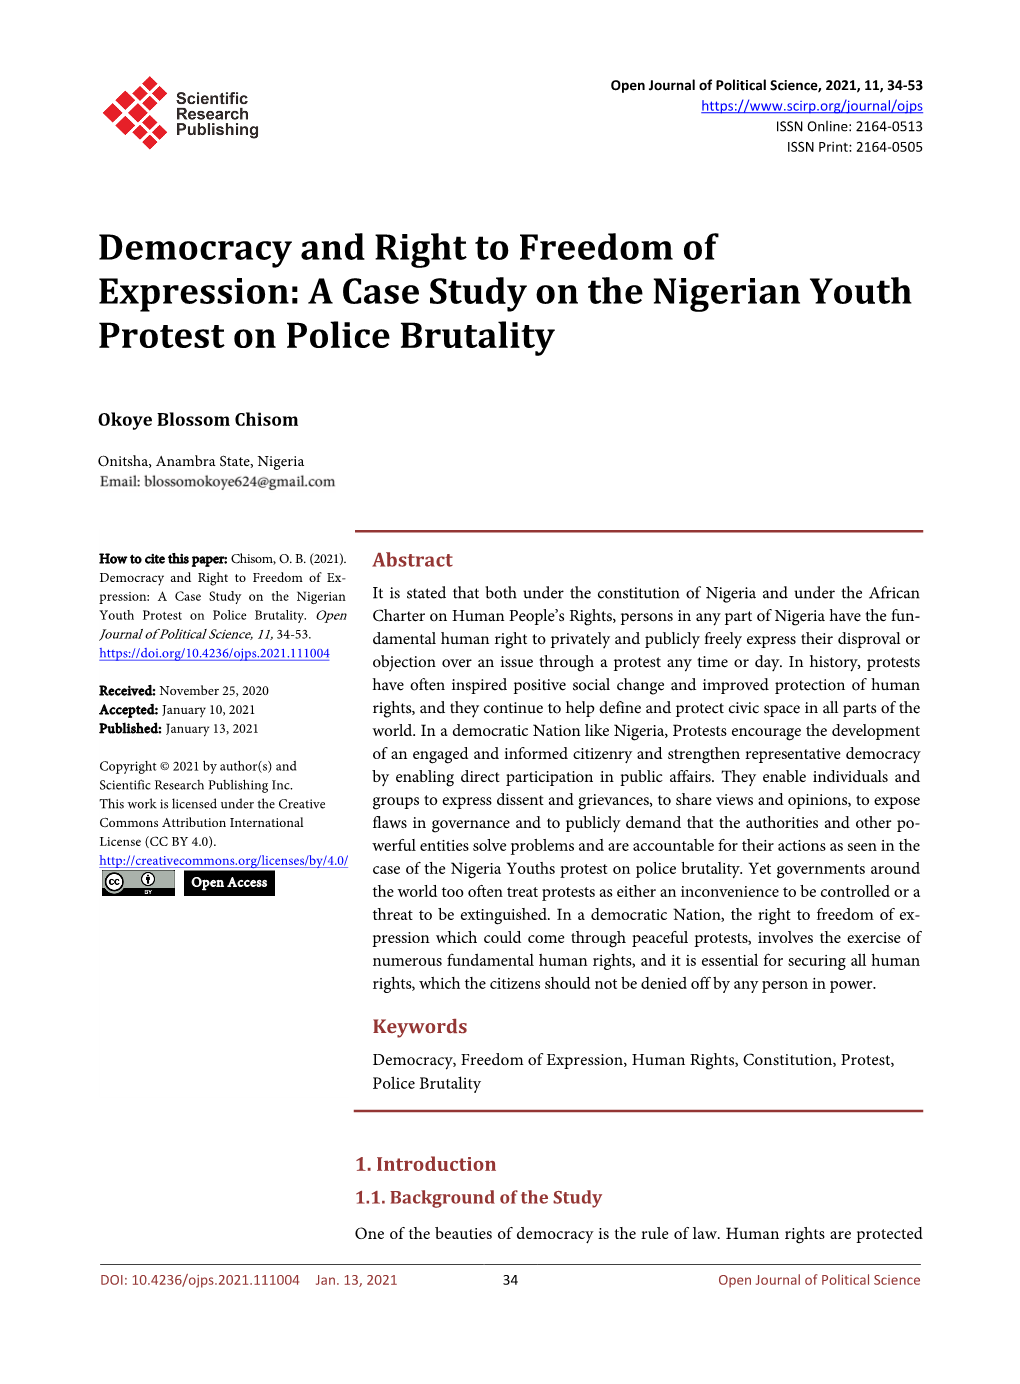 A Case Study on the Nigerian Youth Protest on Police Brutality